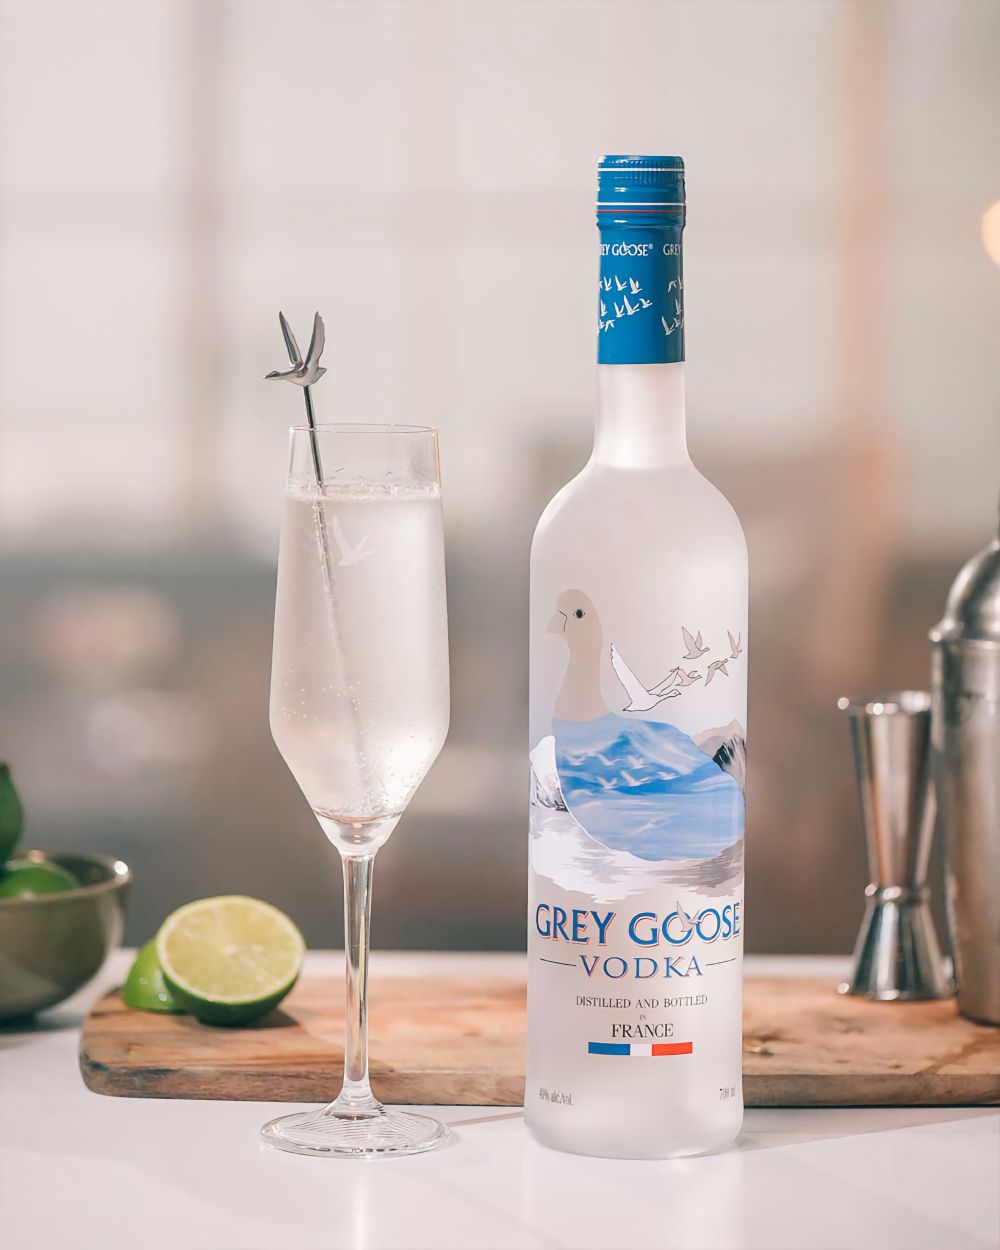 A frosted Grey Goose bottle and flute glass on a kitchen bar.